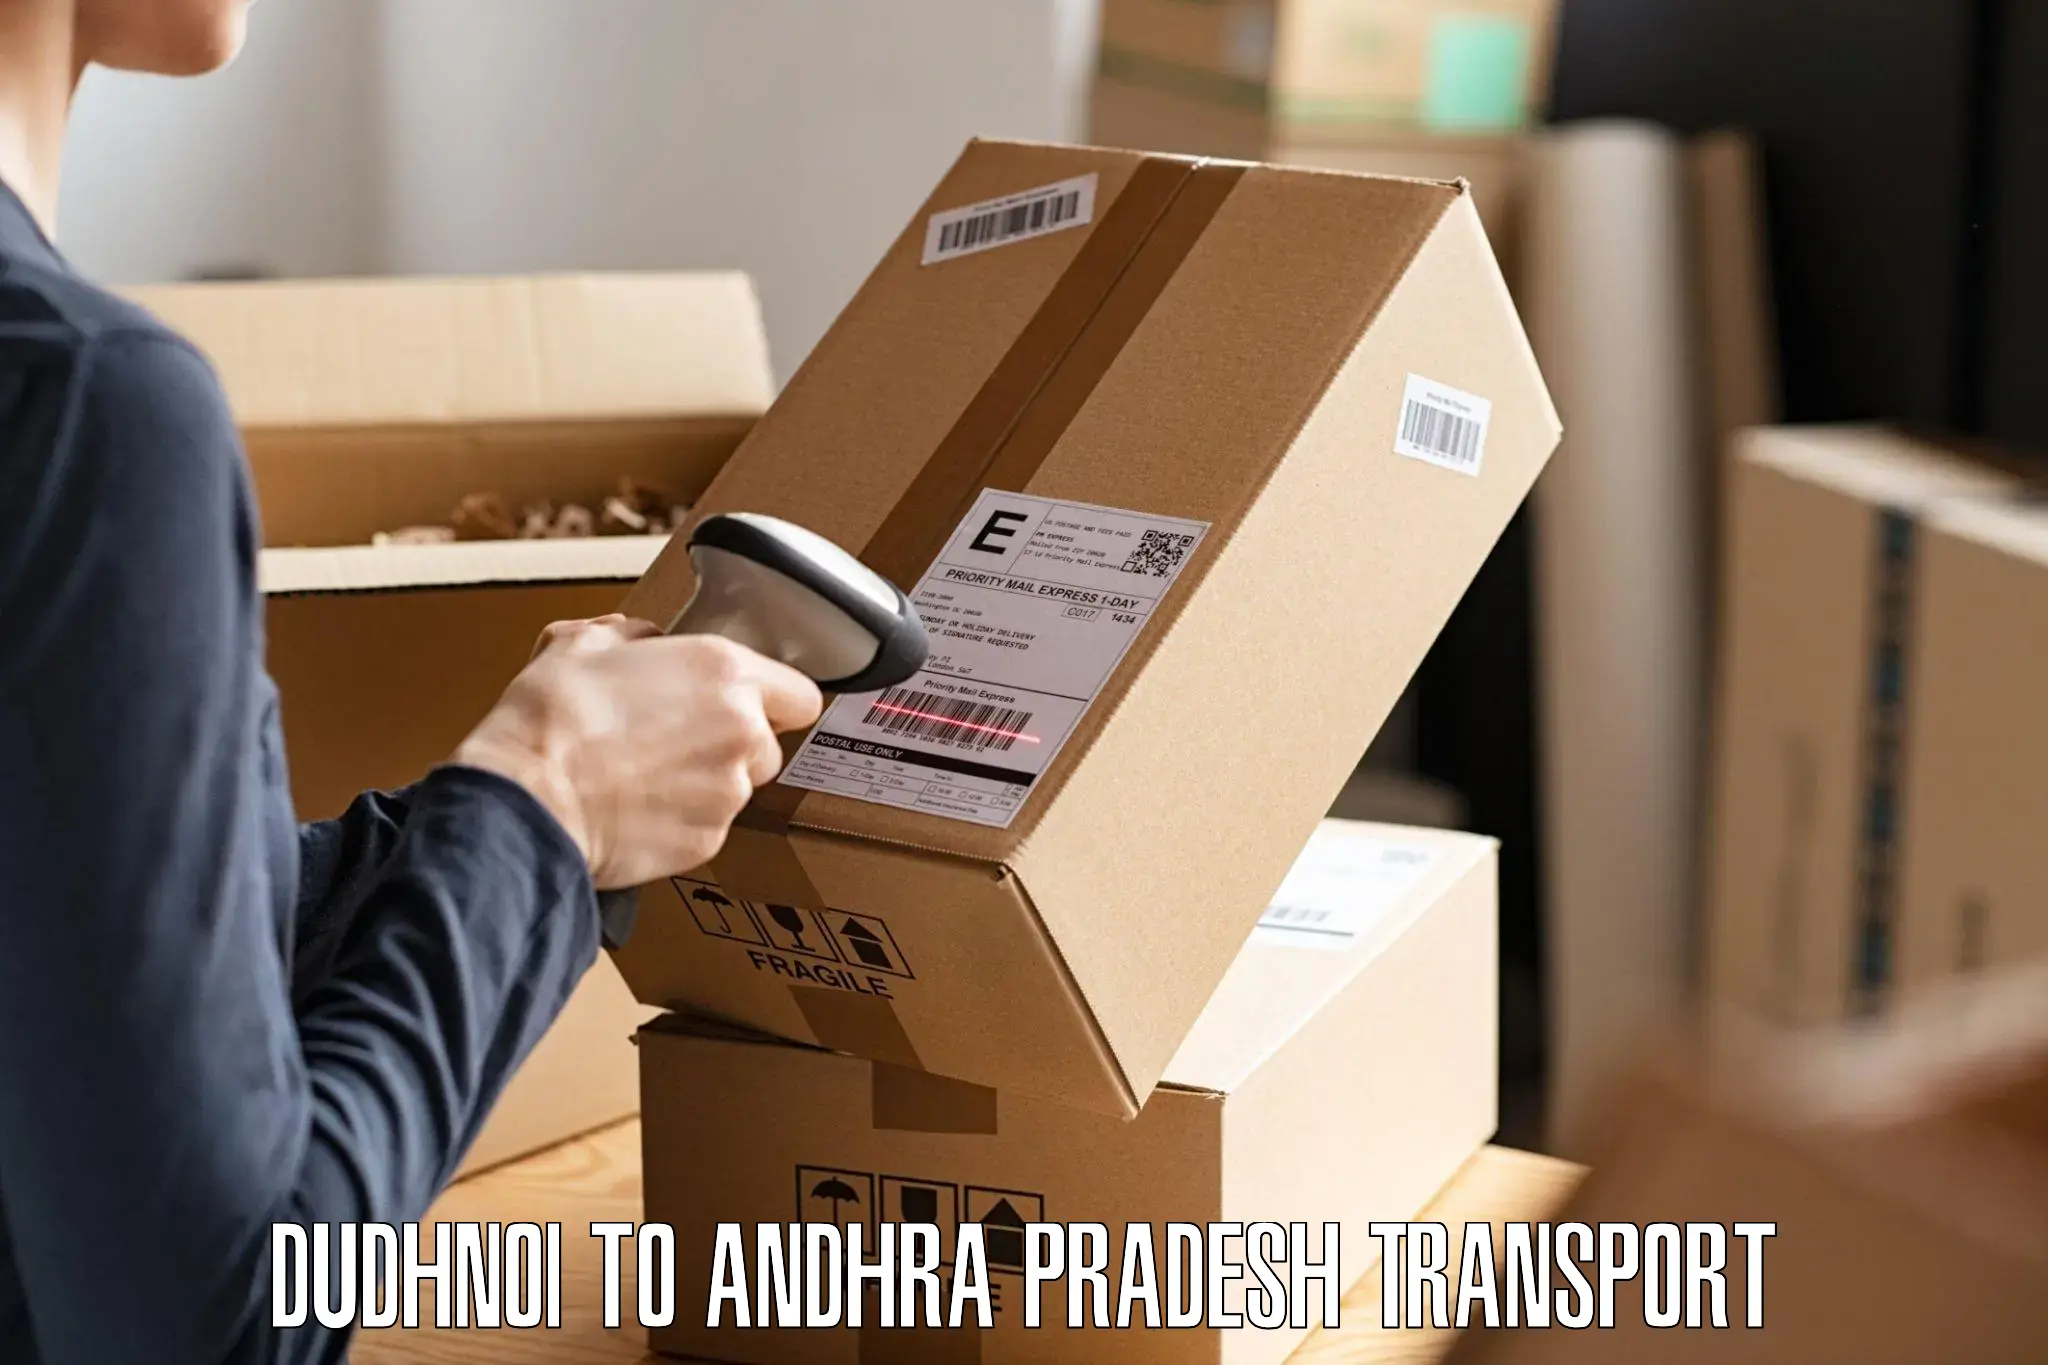 Transport shared services Dudhnoi to Andhra Pradesh